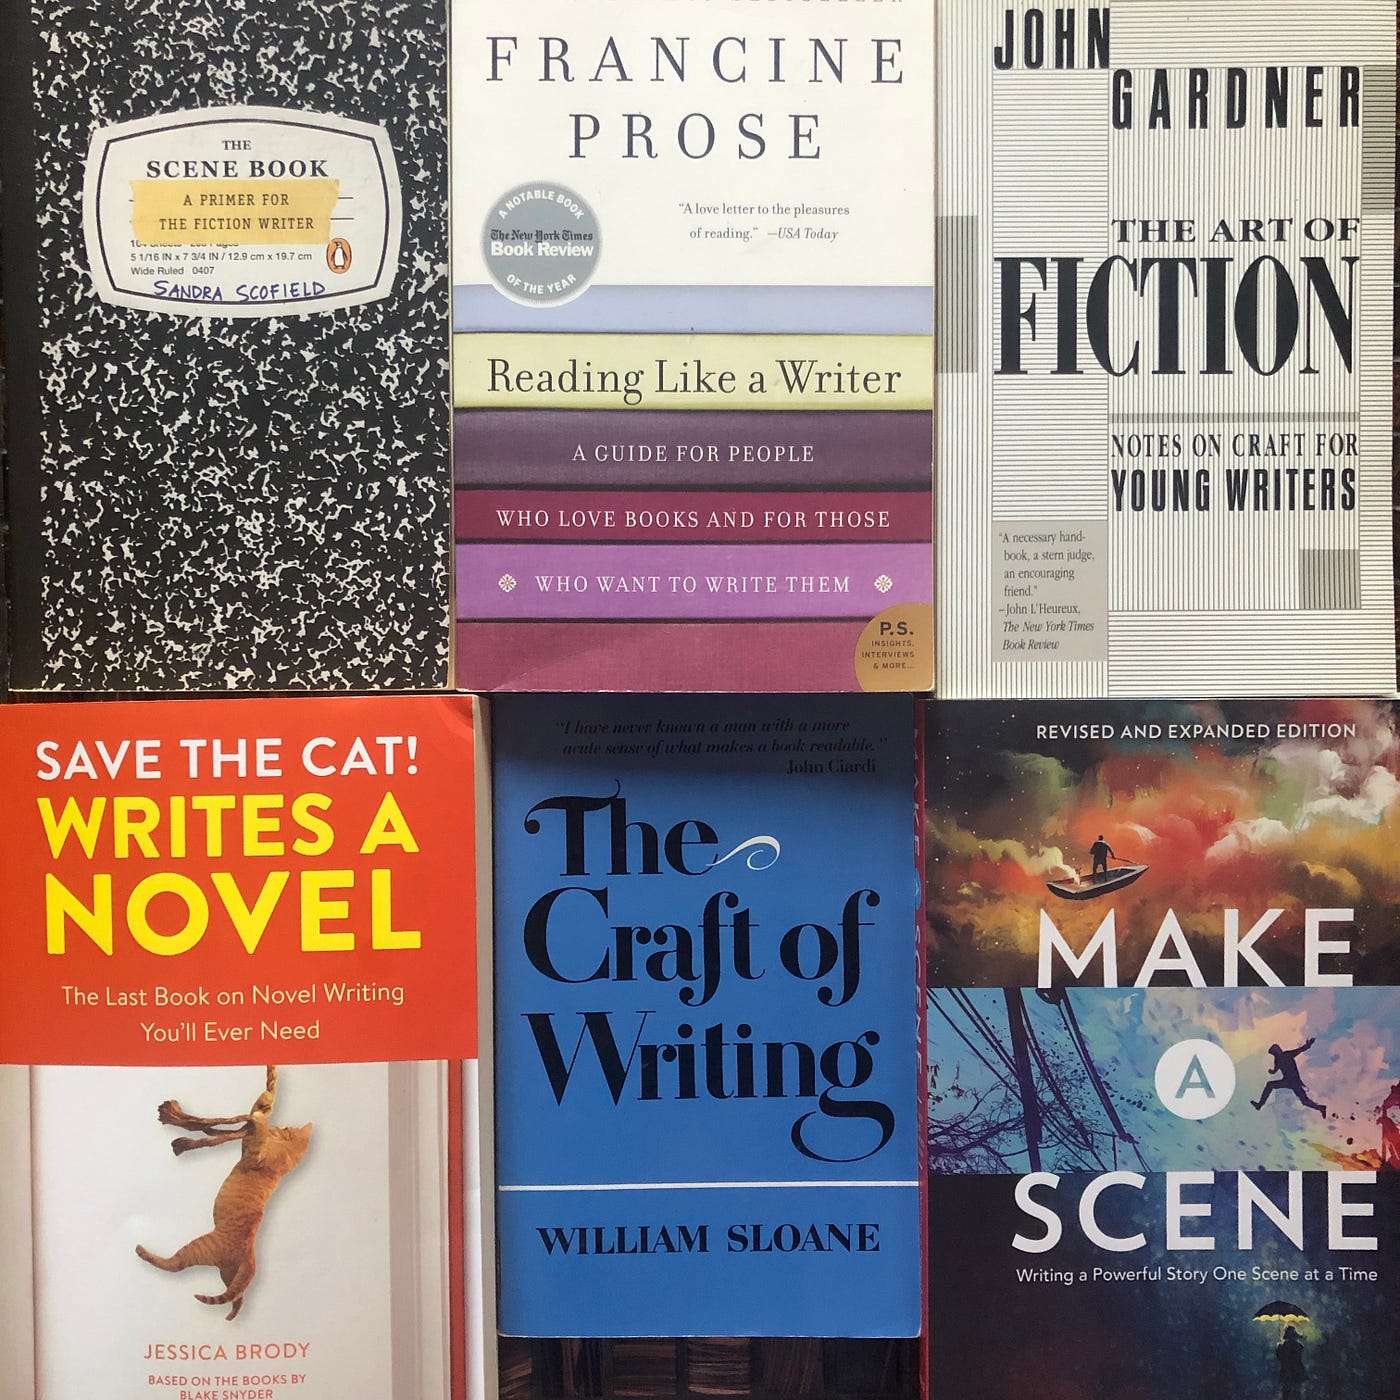 6 Craft Books for Fiction Writers, by Amanda Todisco